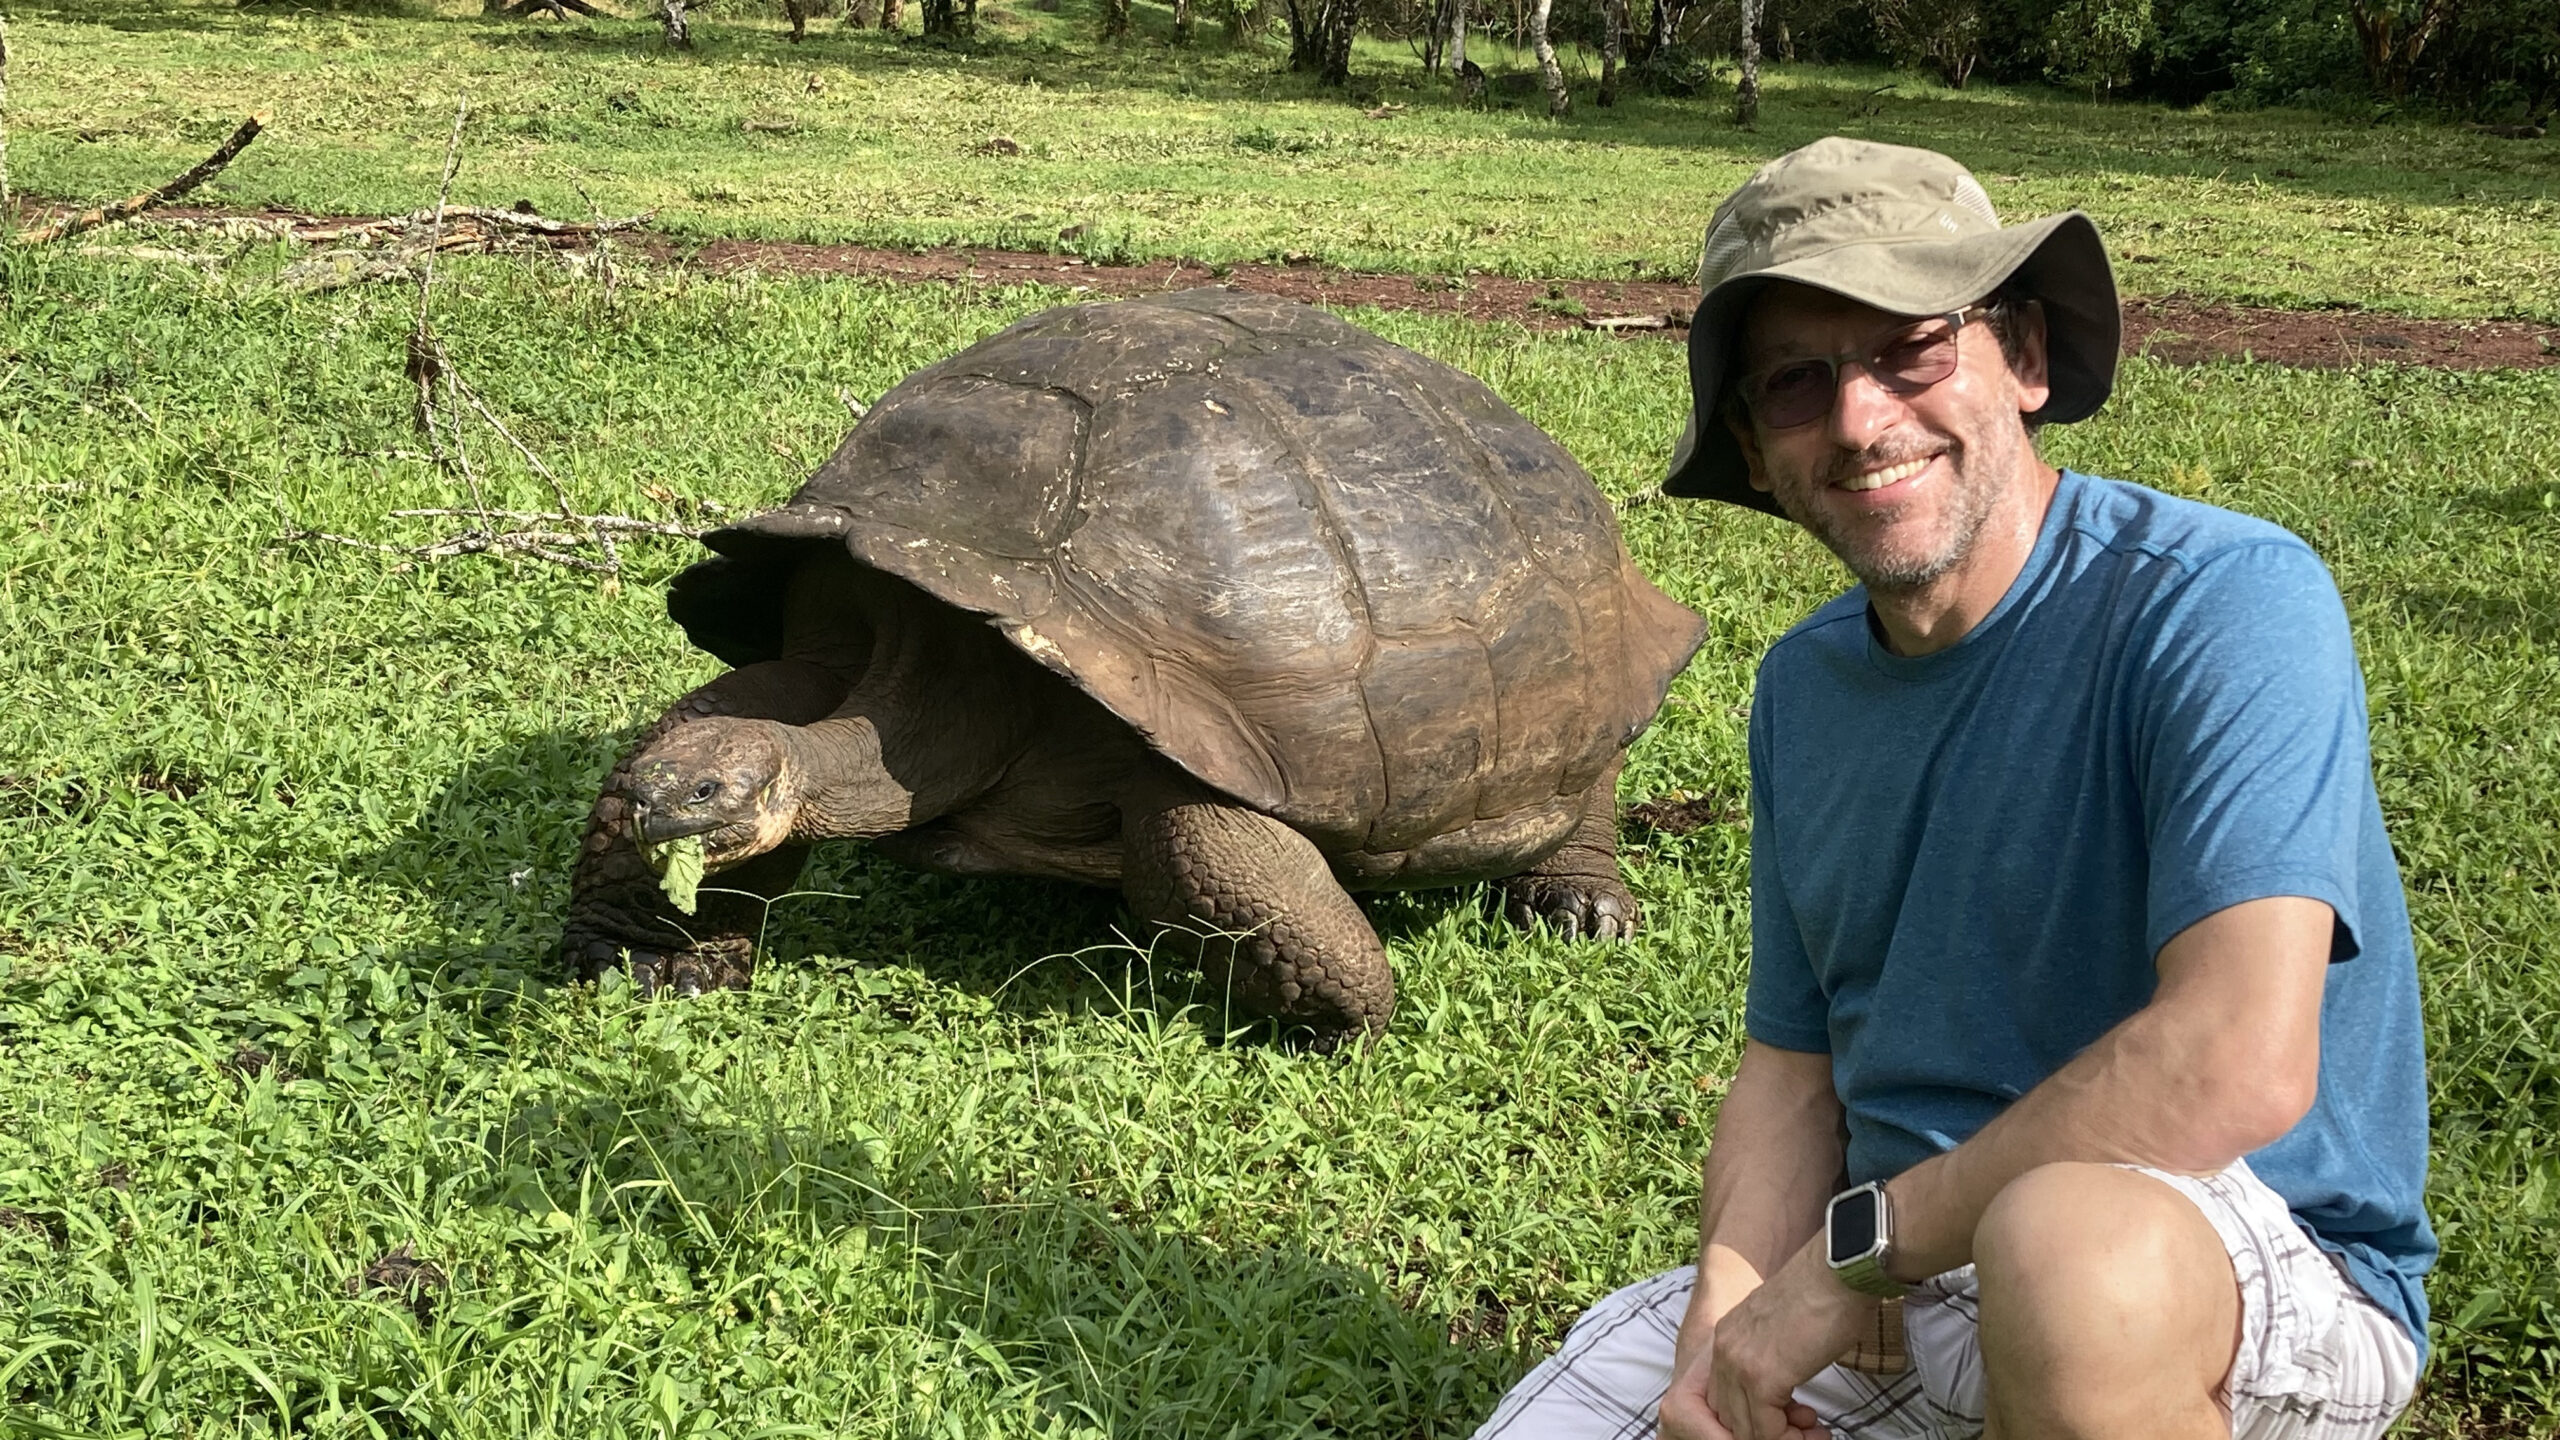 Dr. Stephen Divers, pictured with a Galapagos tortoise